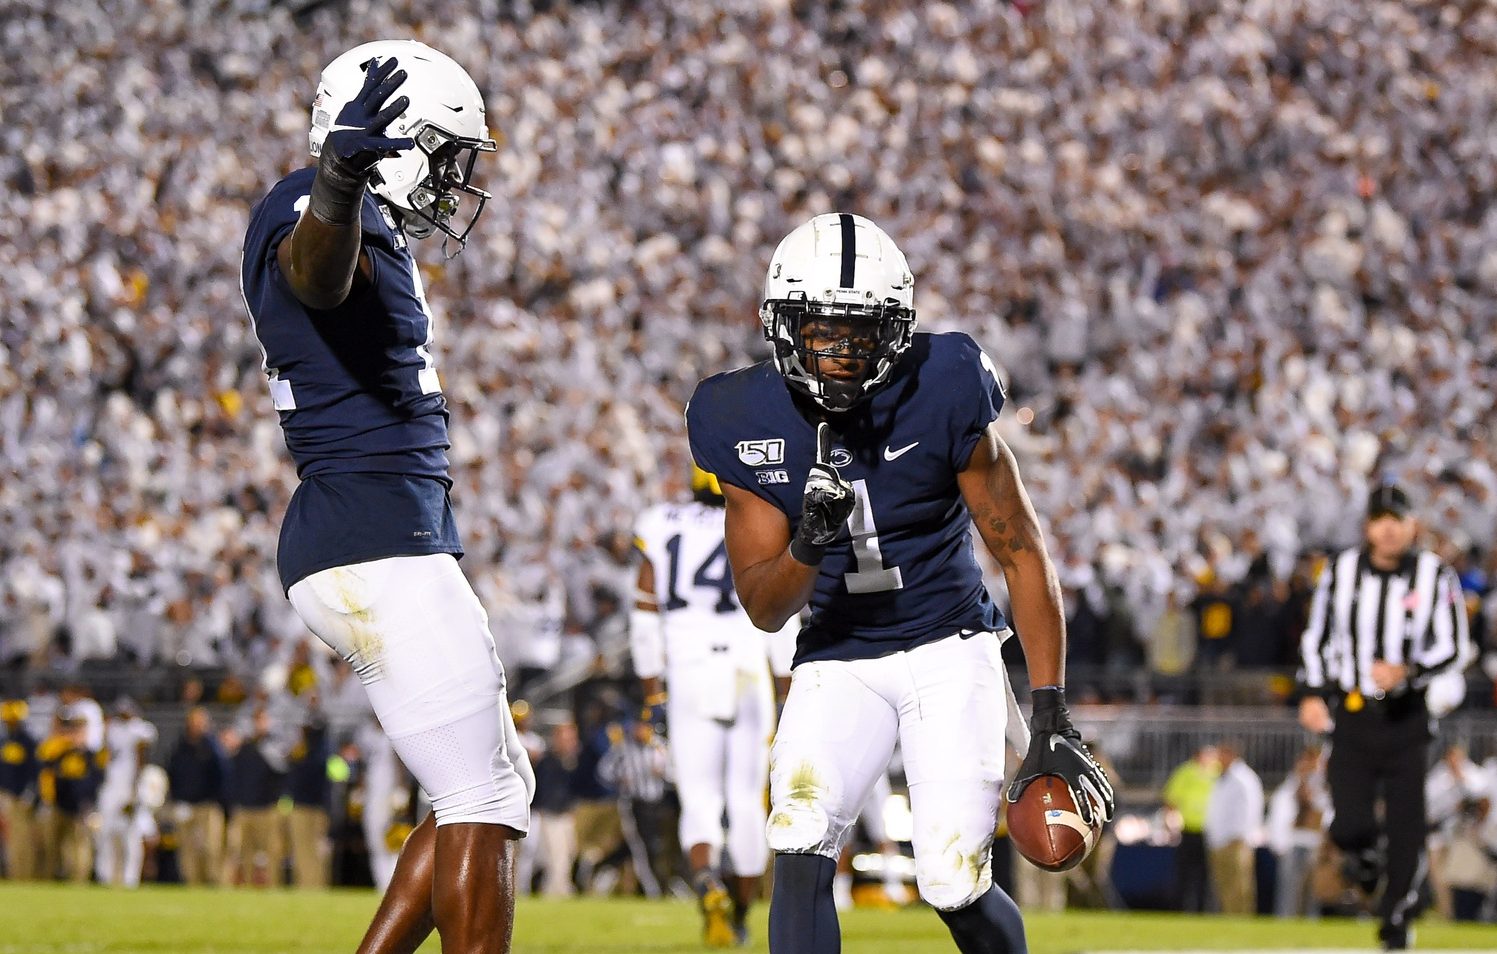 Podcast: Final thoughts on Penn State-Michigan